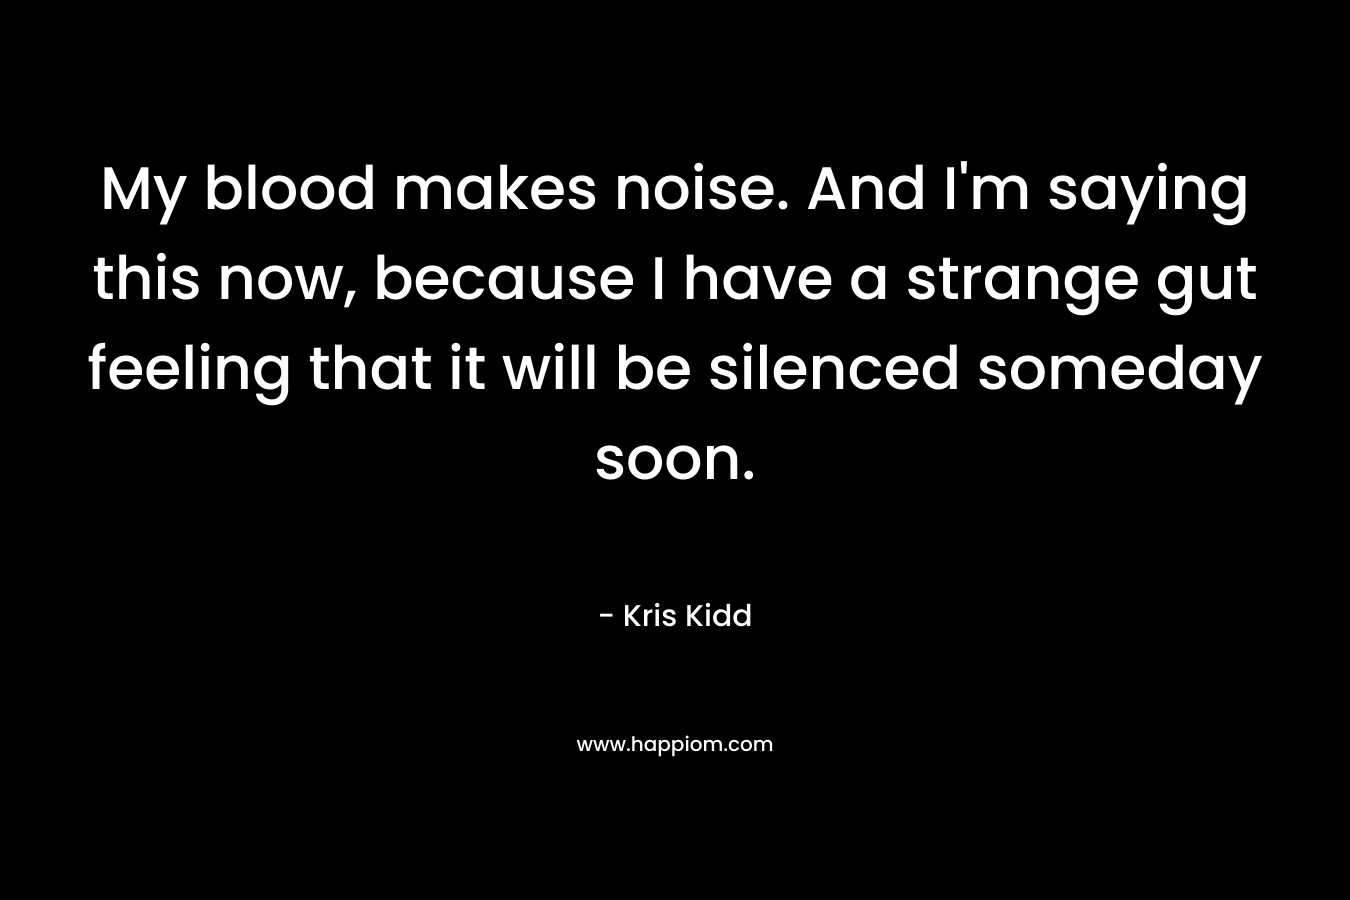 My blood makes noise. And I’m saying this now, because I have a strange gut feeling that it will be silenced someday soon. – Kris Kidd